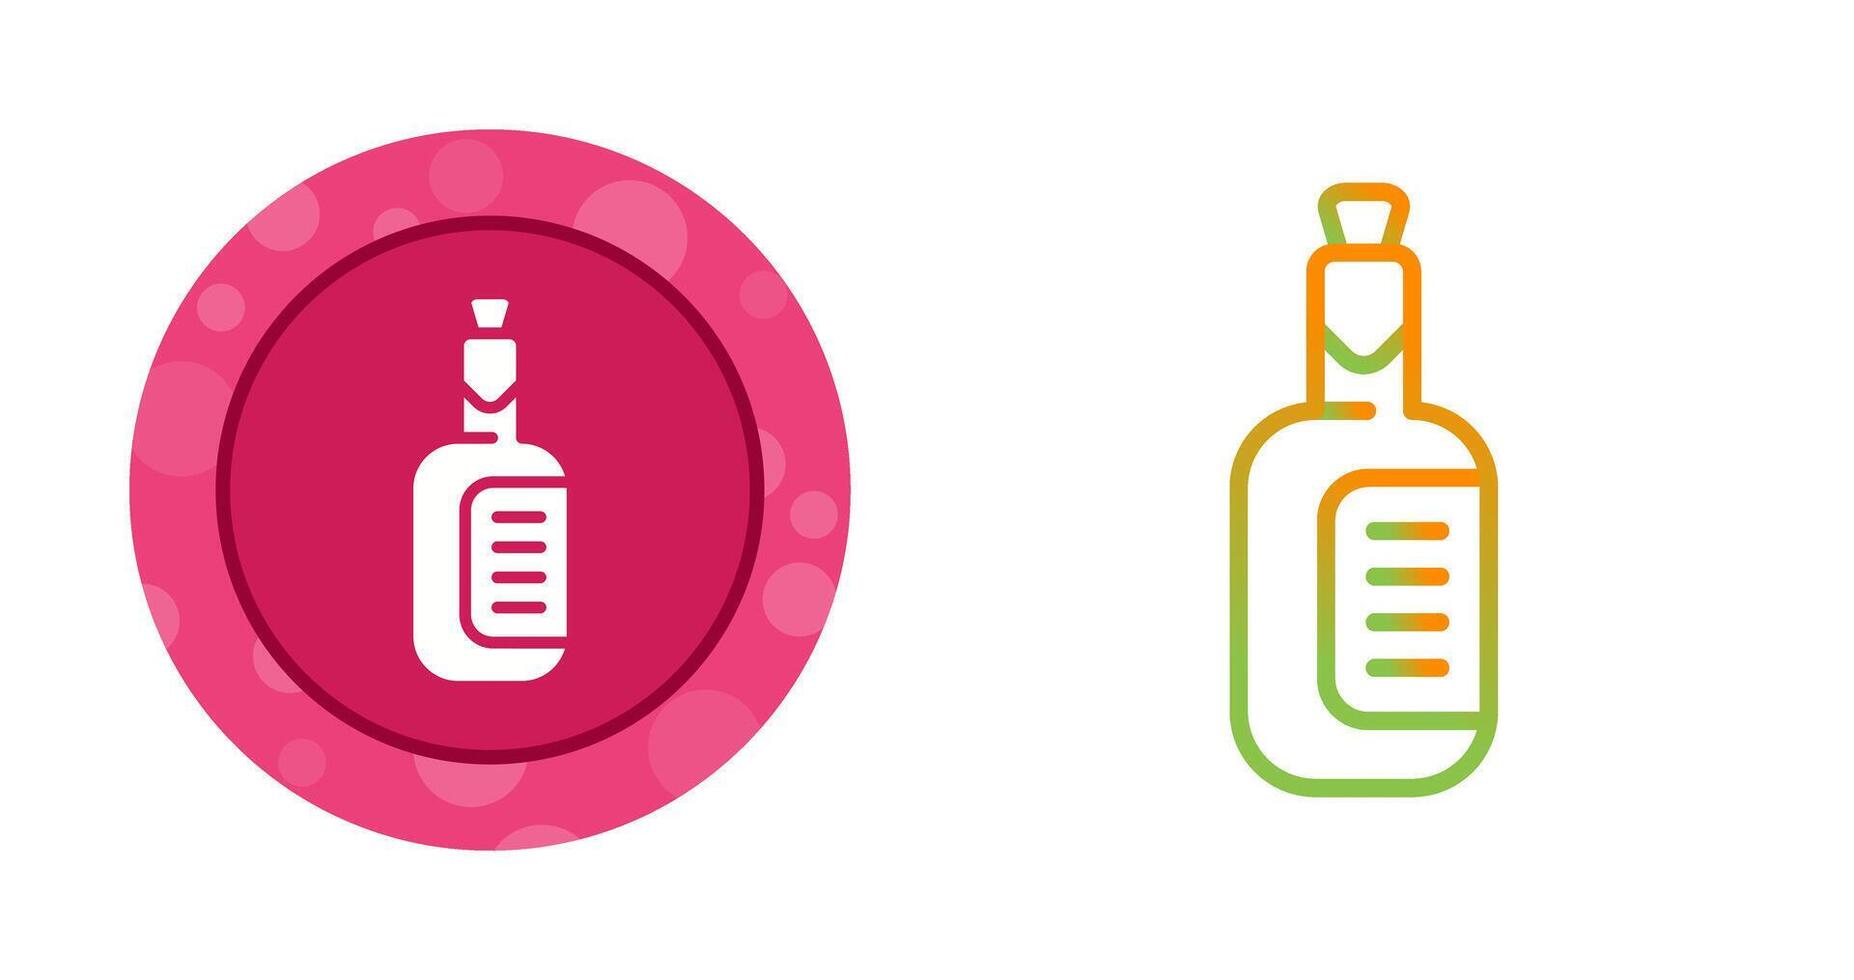 Champagne bottle Vector Icon